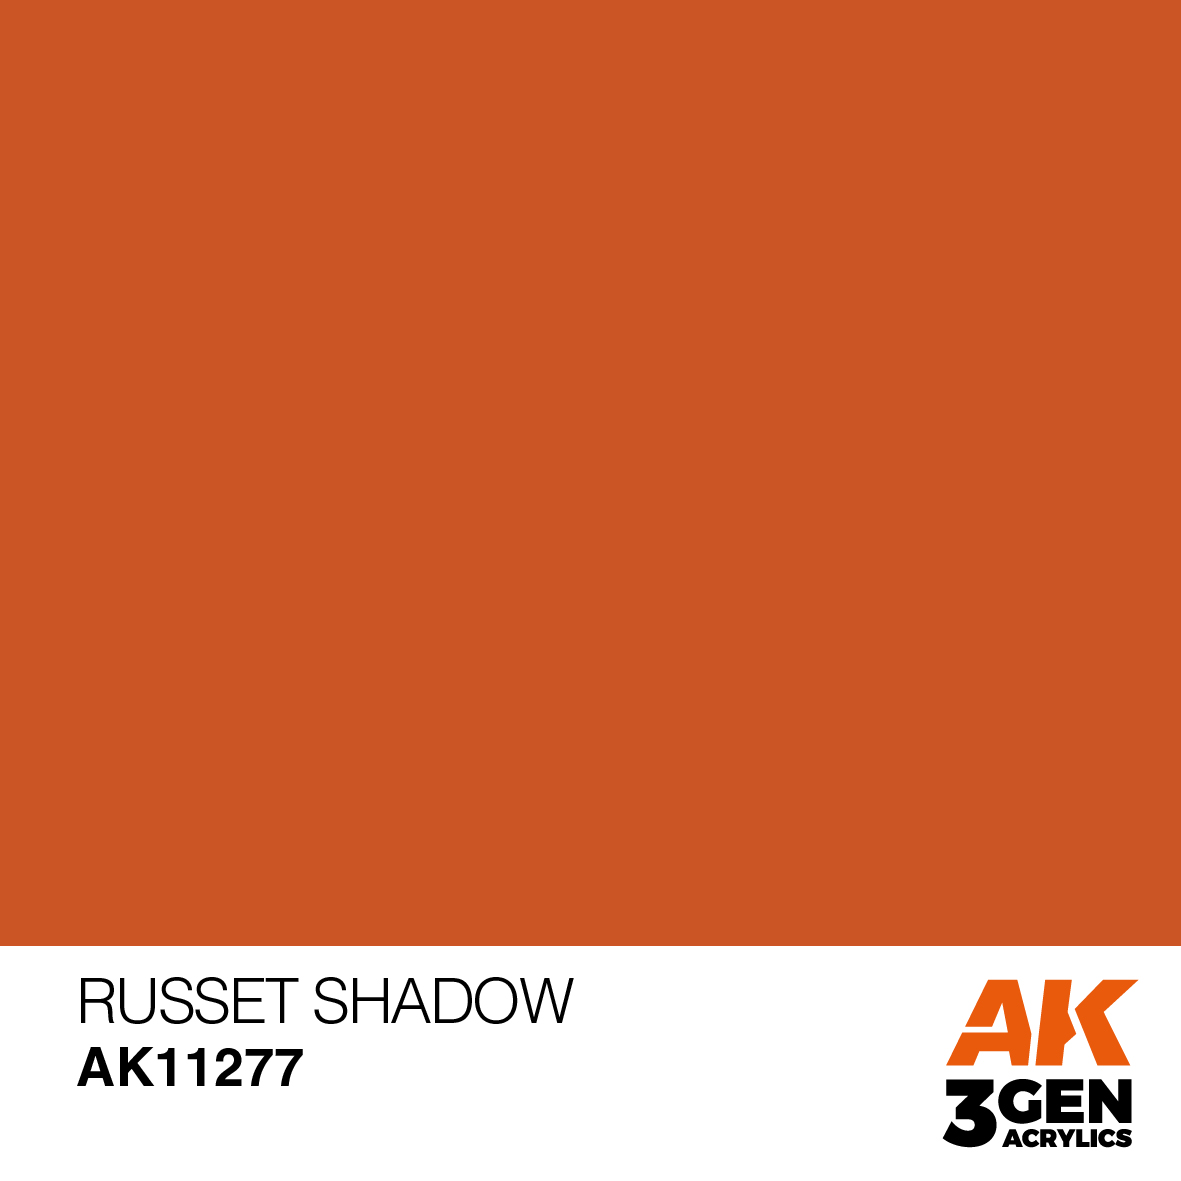 RUSSET SHADOW – COLOR PUNCH